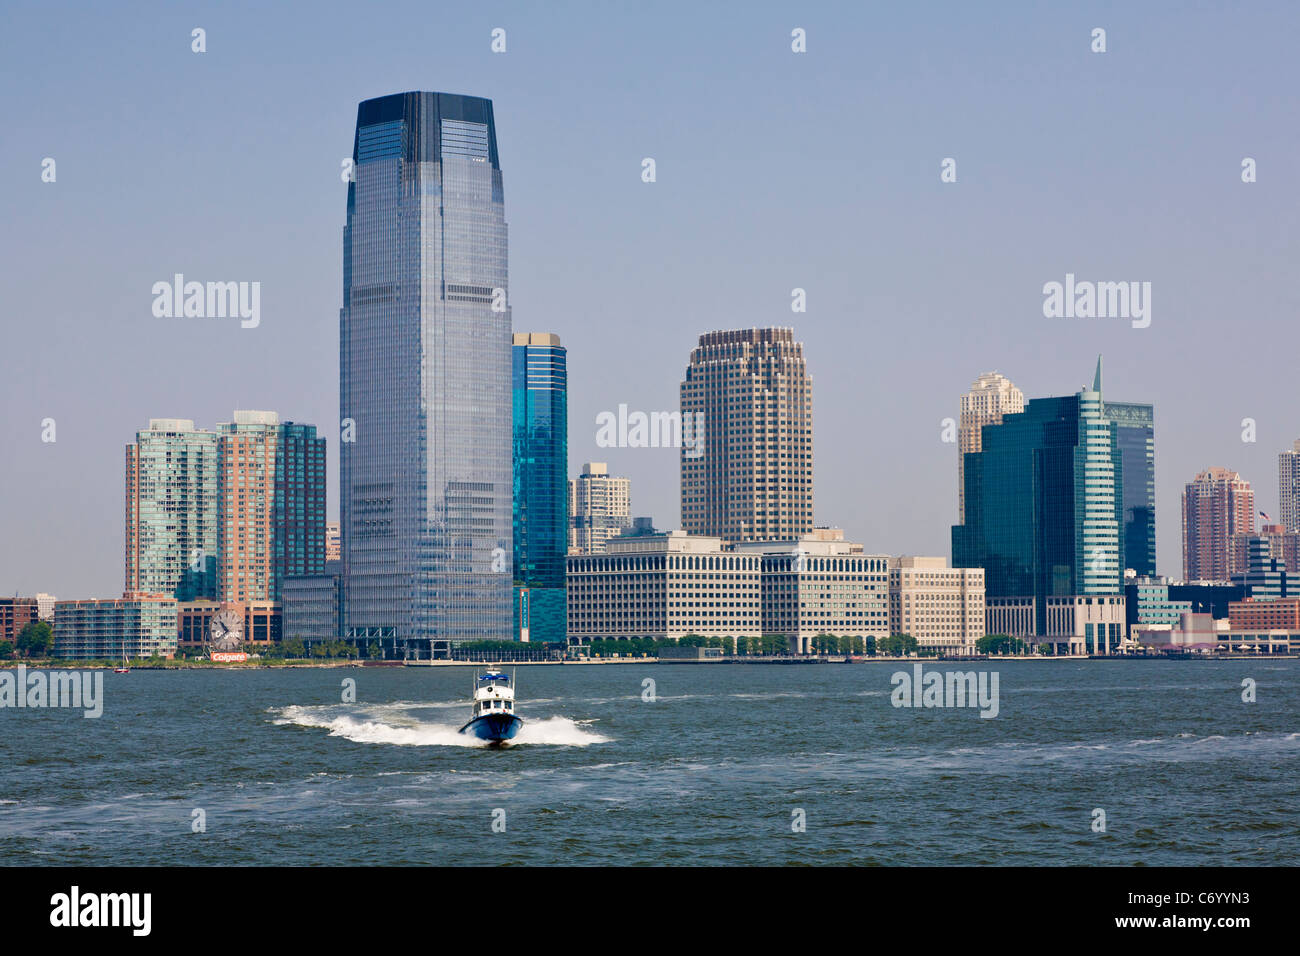 Jersey City New Jersey across the Hudson River from Manhattan in New York City Stock Photo